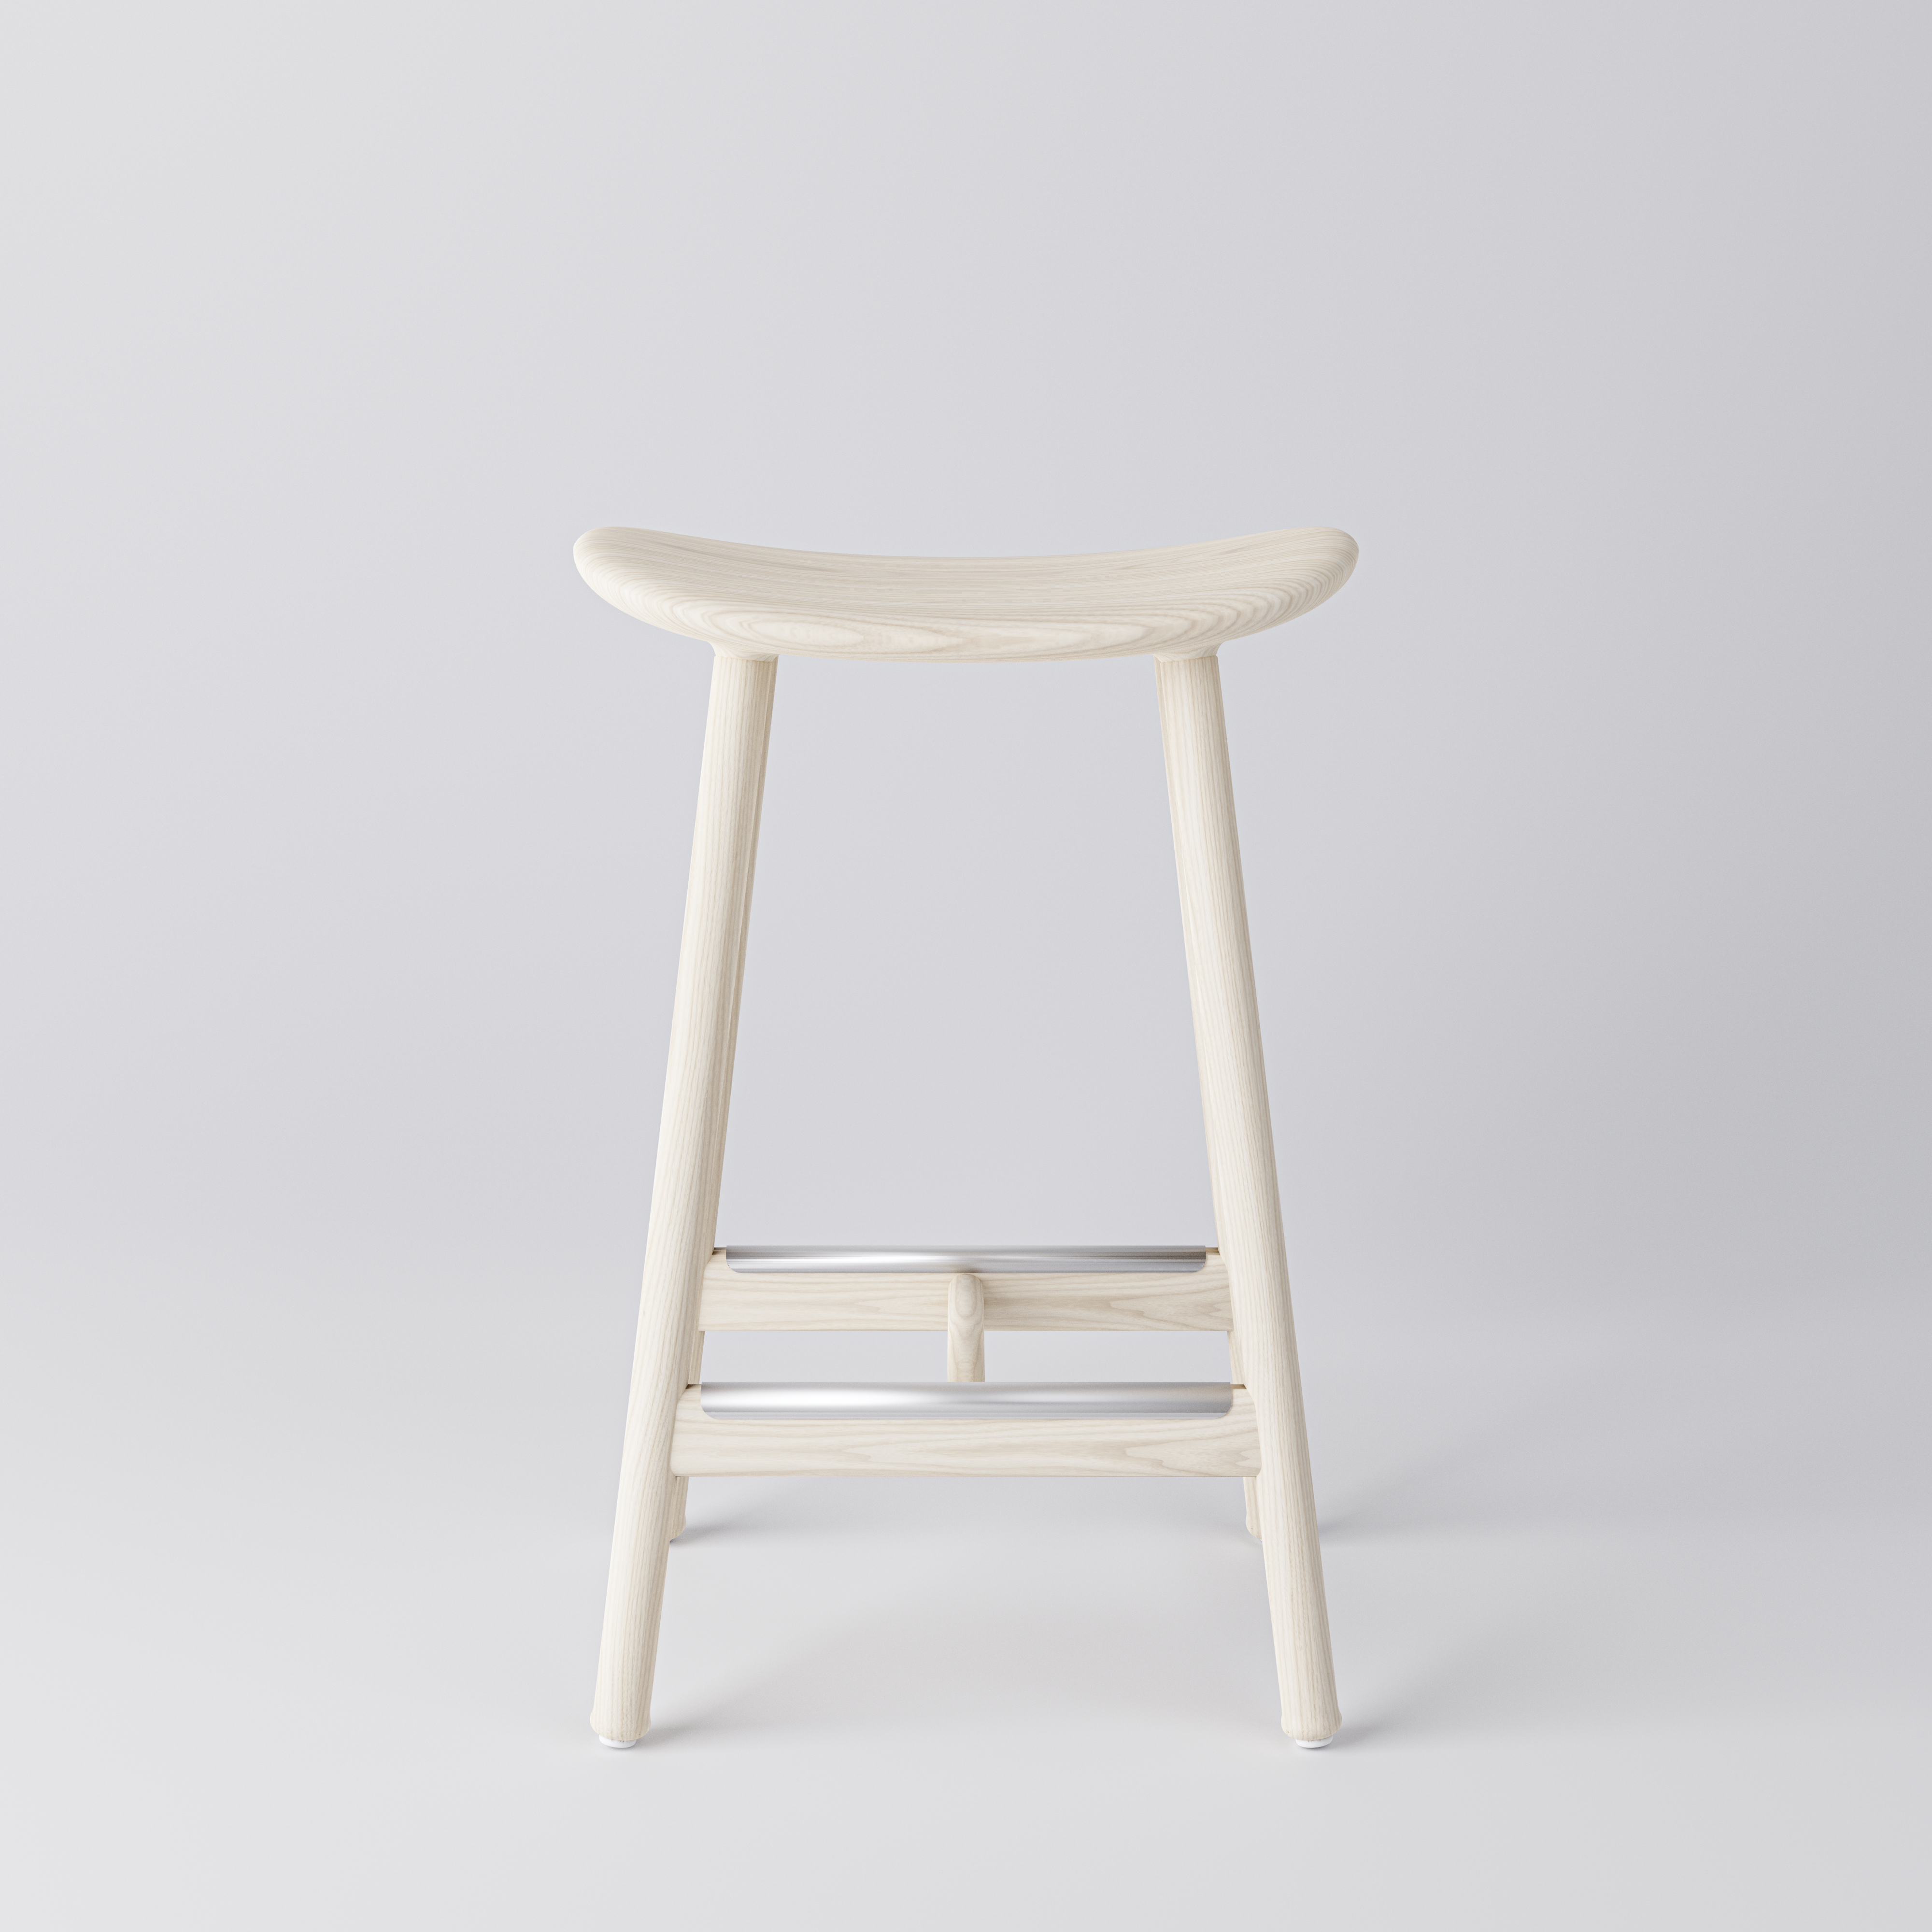 Low Bar Stool Arc, SH650, solid Ash, white pigmented